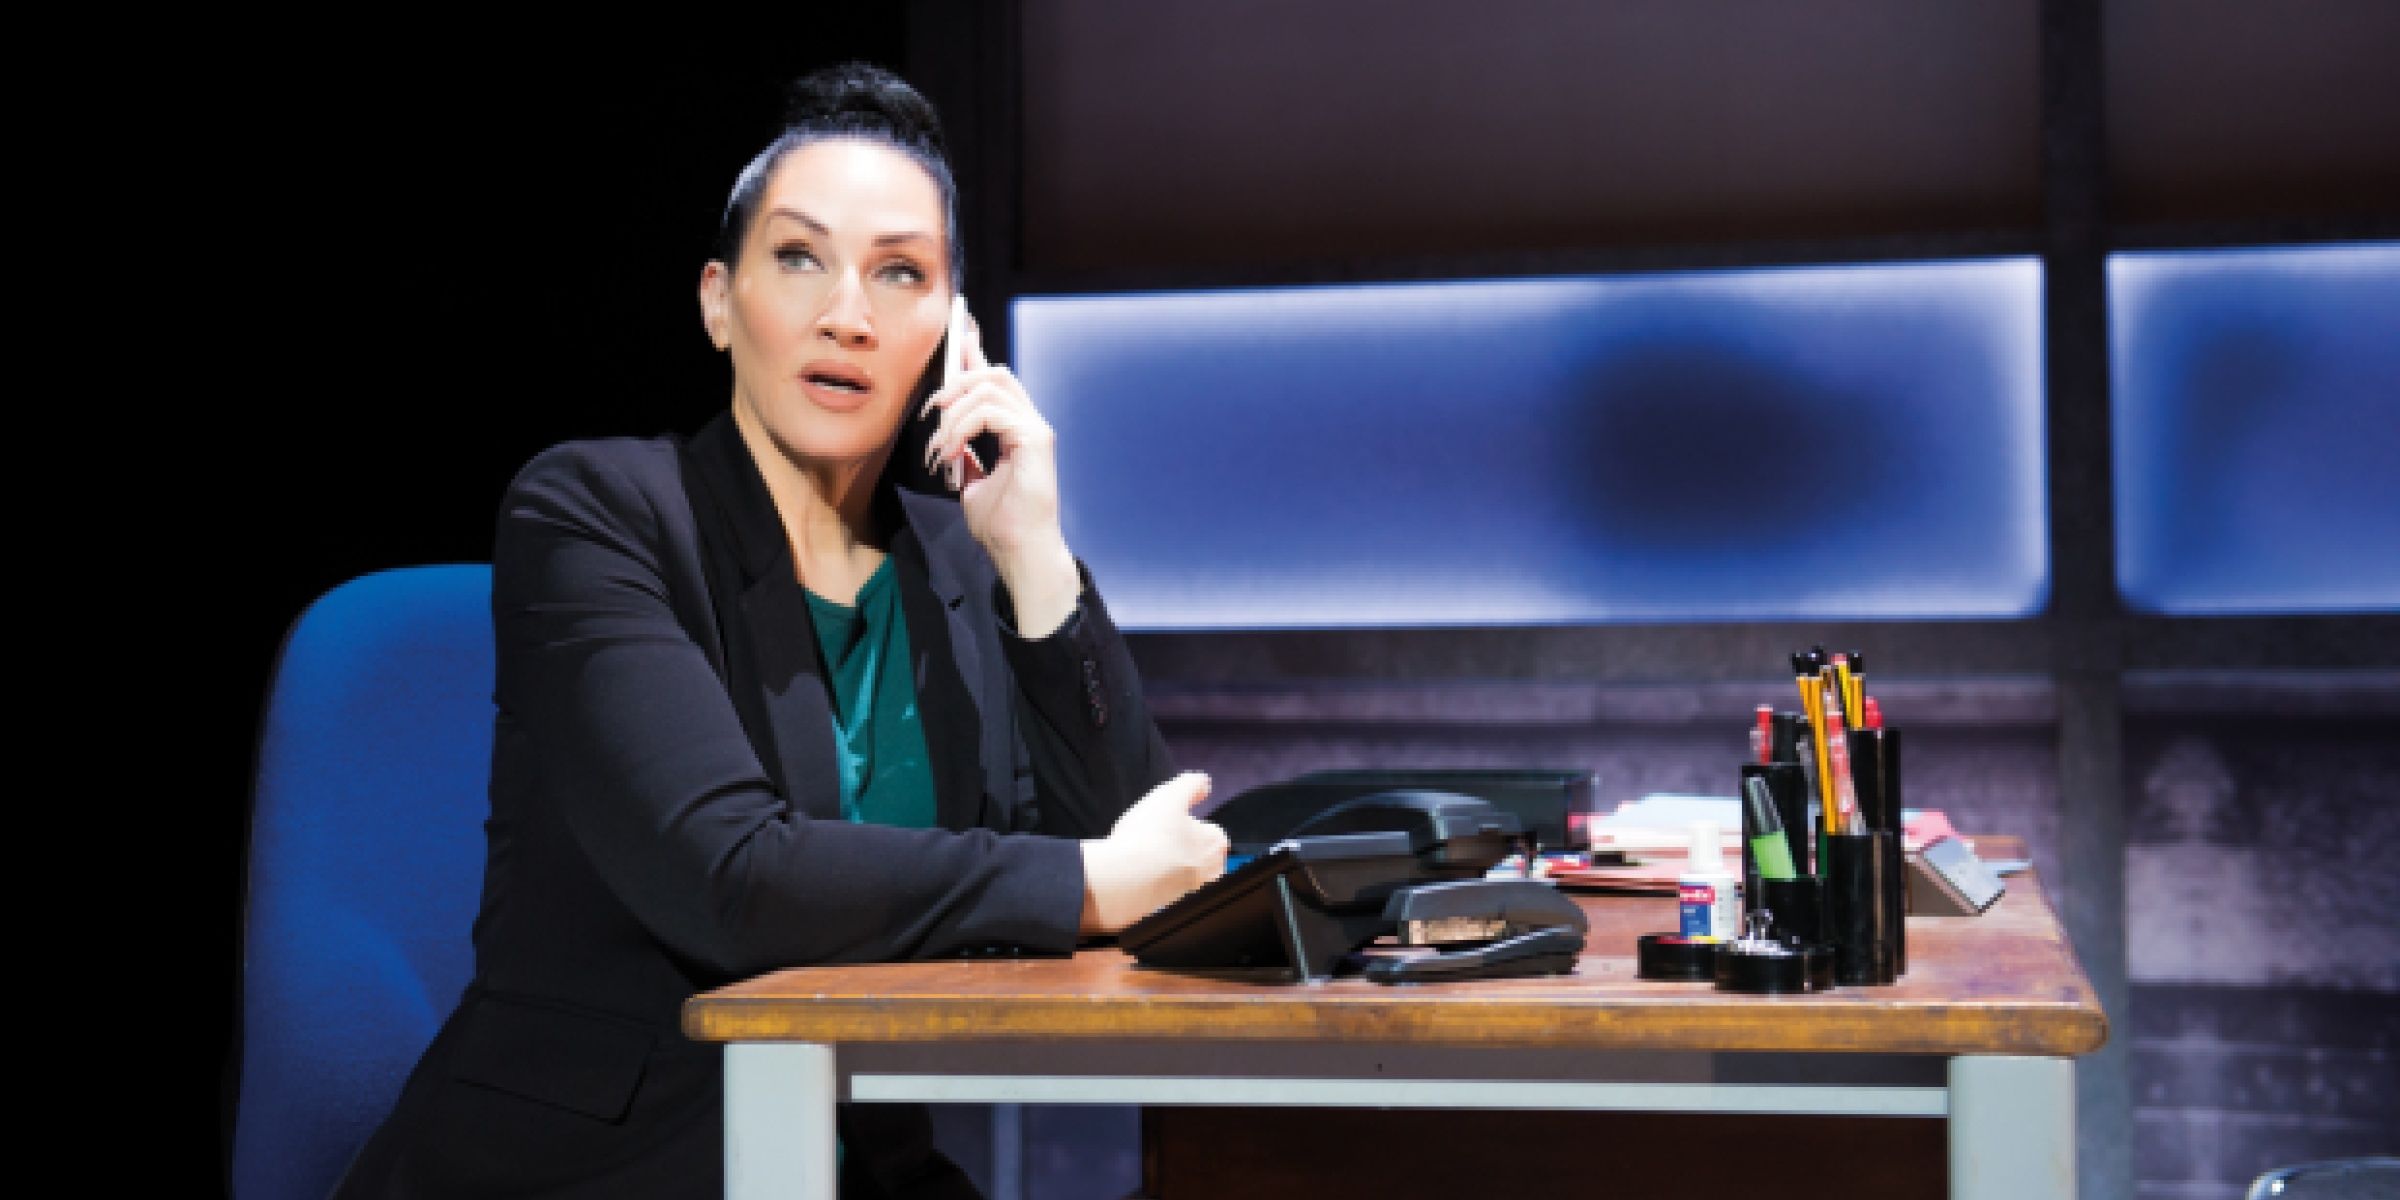 Michelle Visage as Miss Hedge sits behind a desk in the West End production of Everybody’s Talking About Jamie